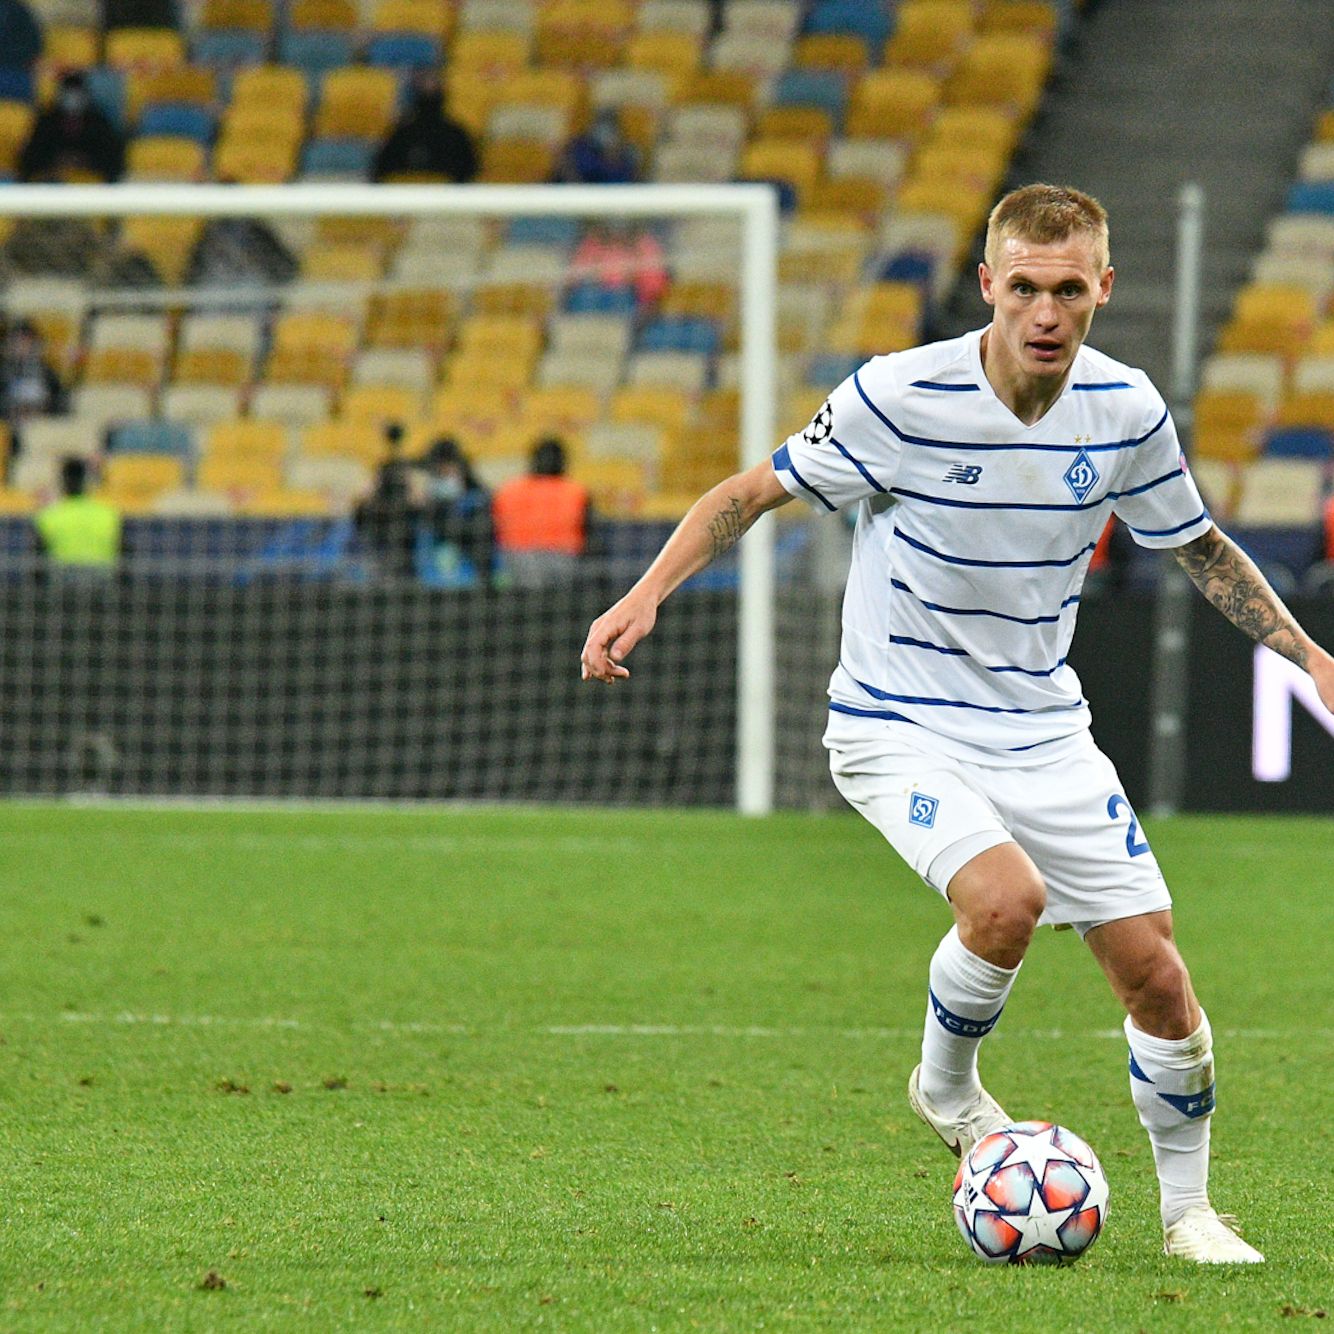 Vitaliy Buialskyi: “We did what we could”